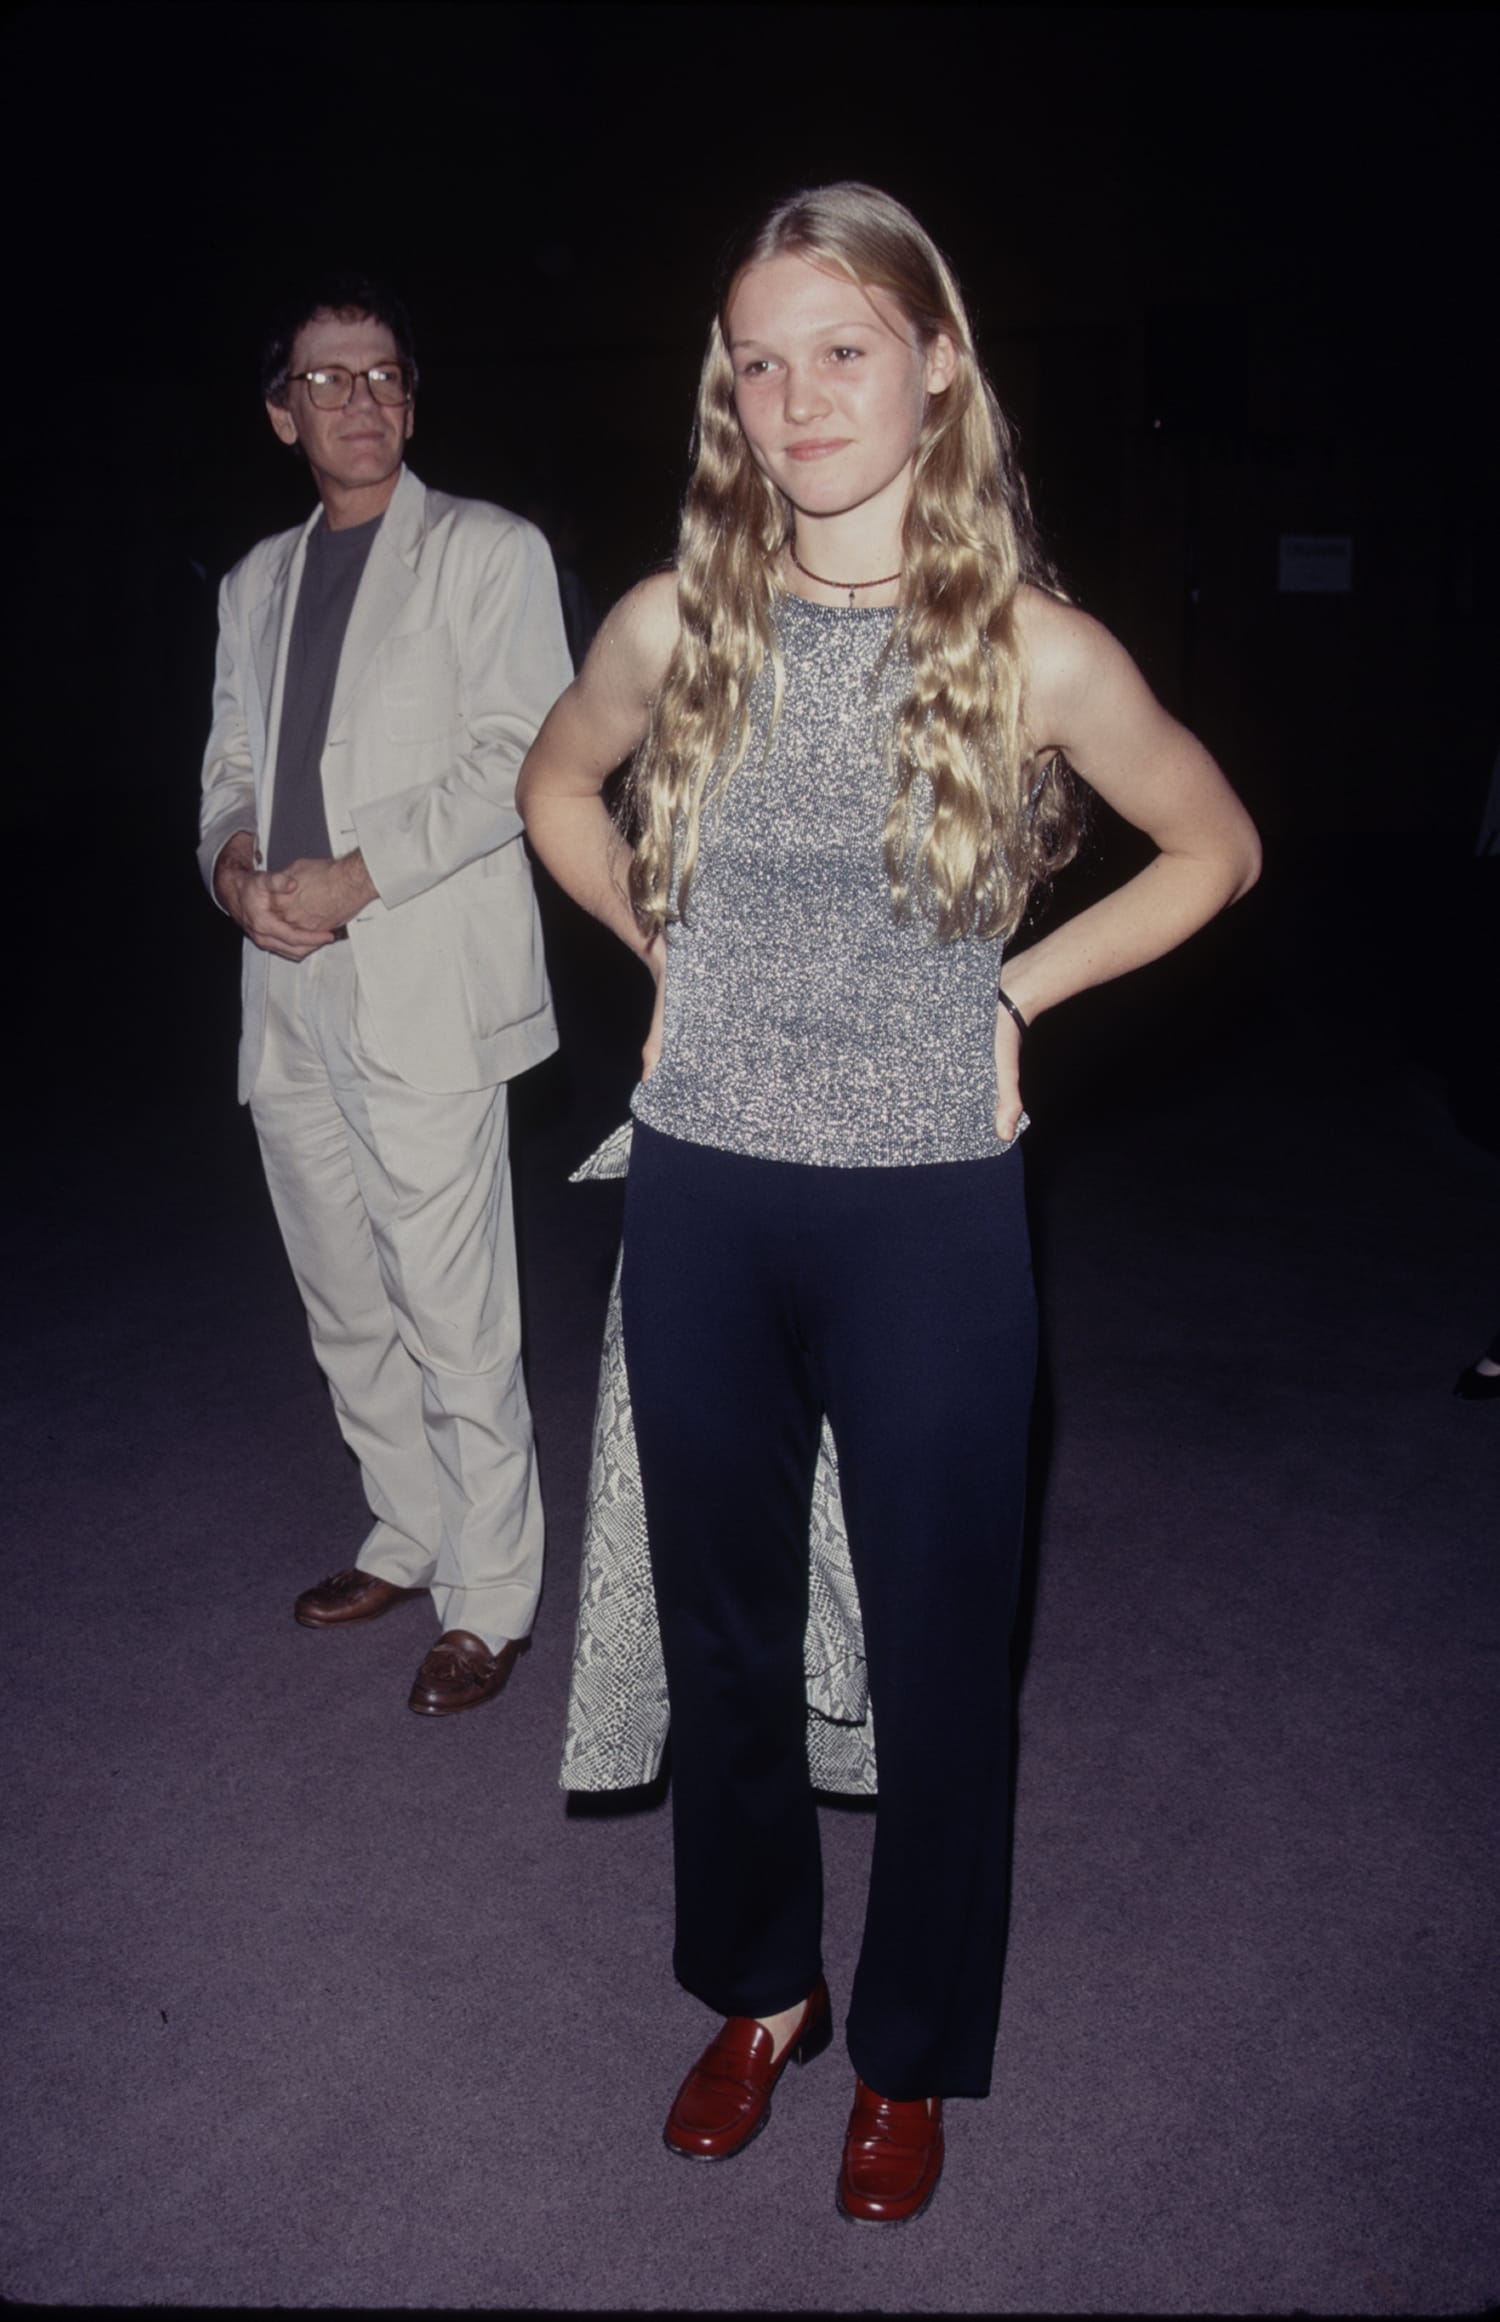 Jobtilbud Panorama Barn This was a choice': Julia Stiles looks back on past red-carpet fashions